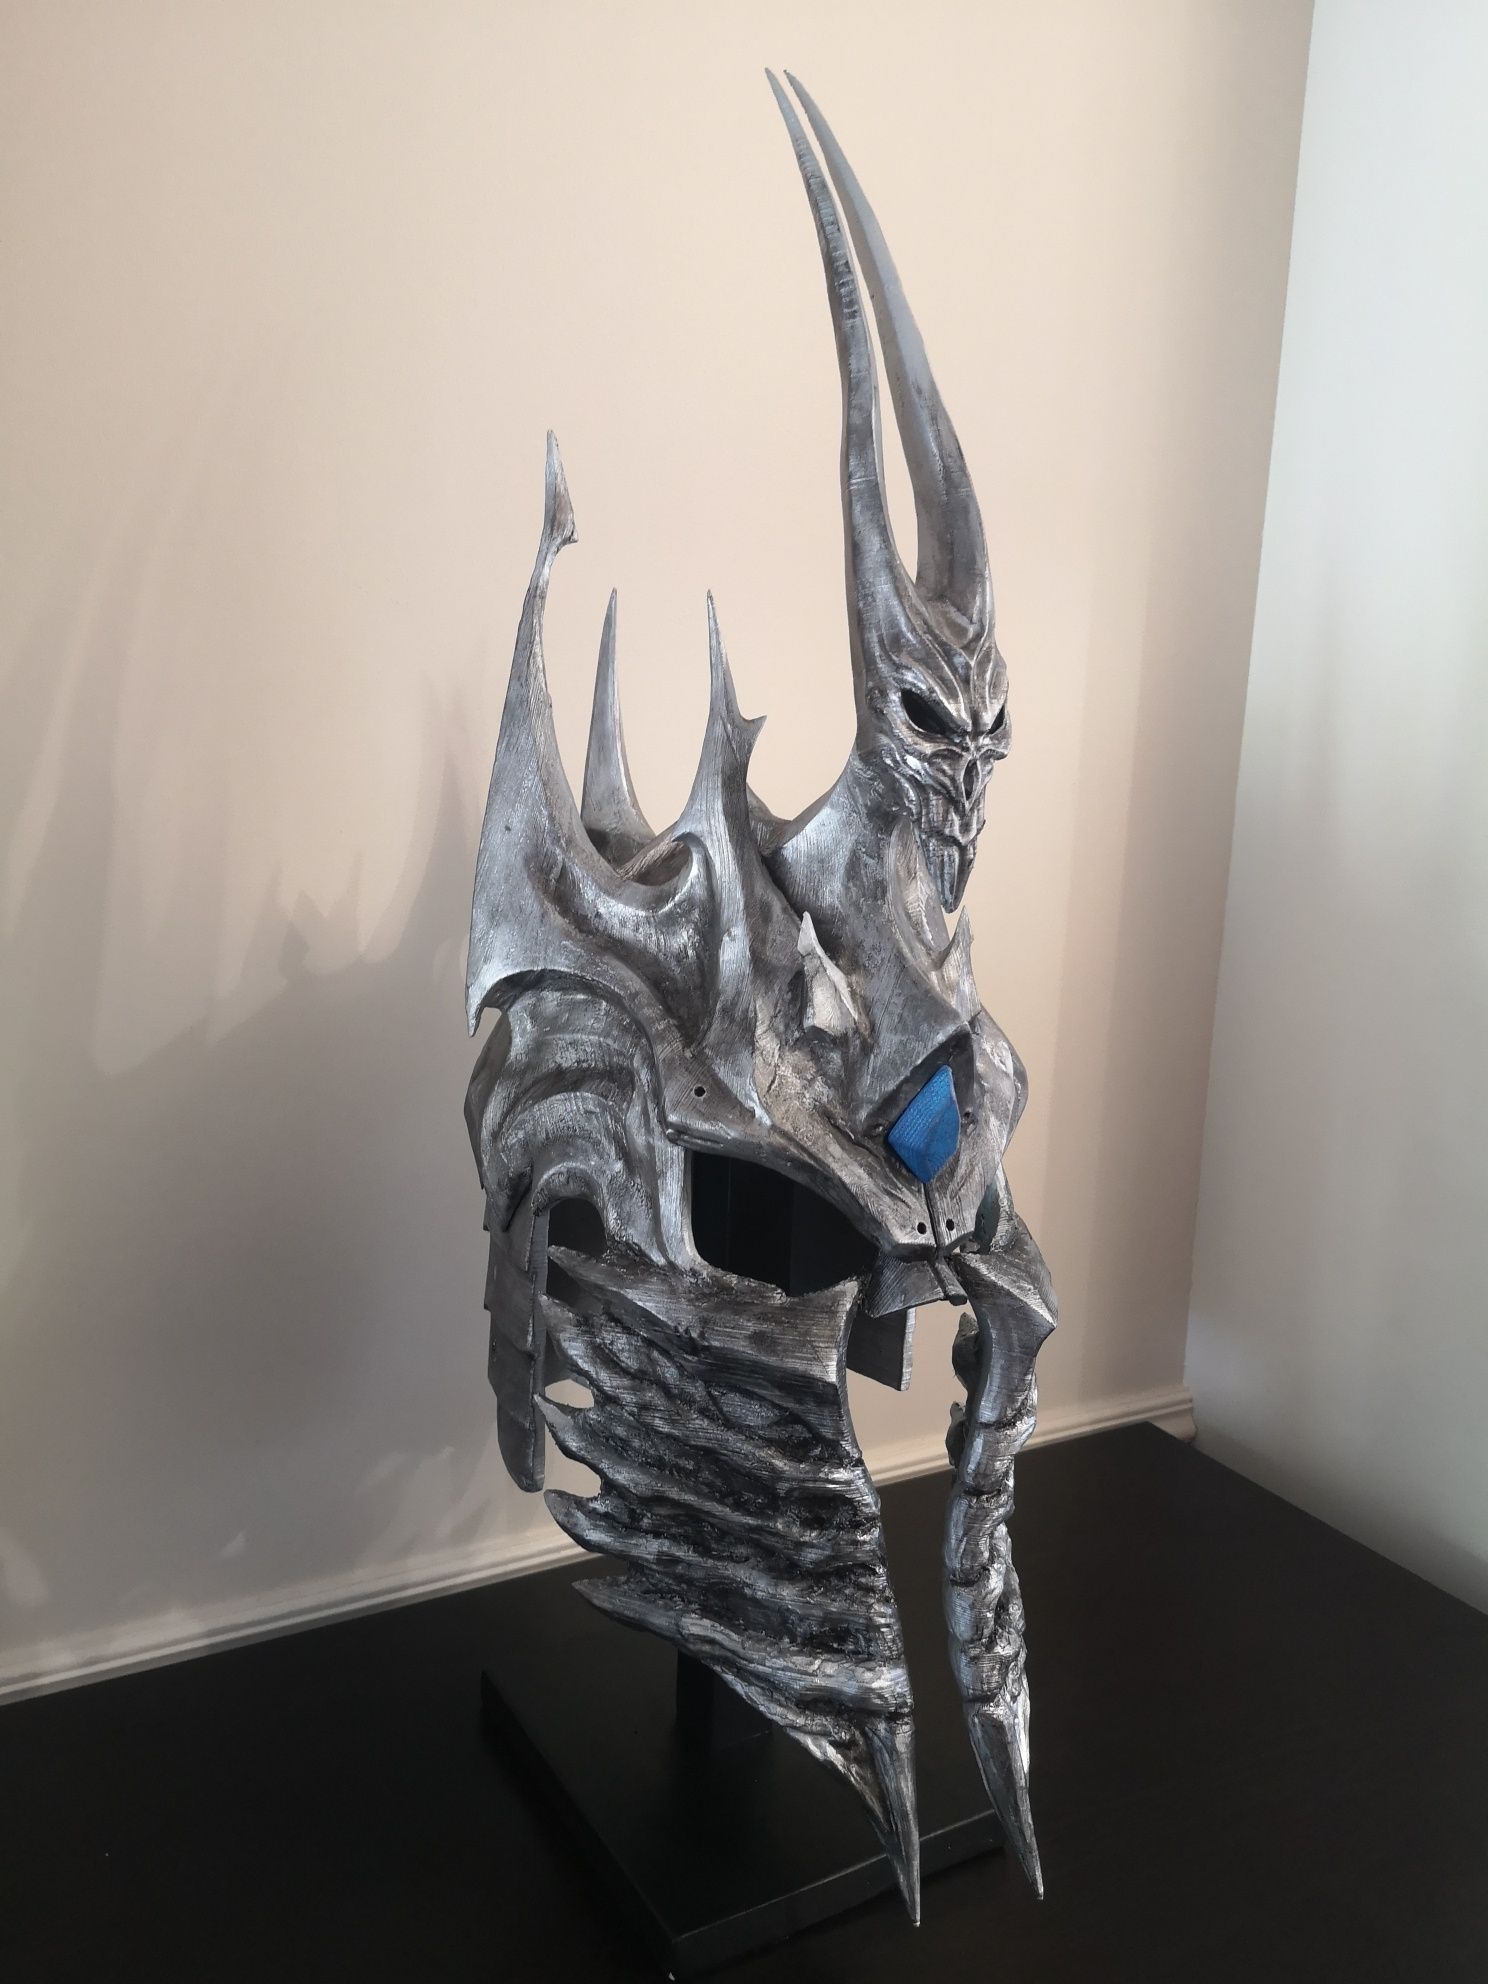 Capacete do Lich King - WoW - World of WarCraft